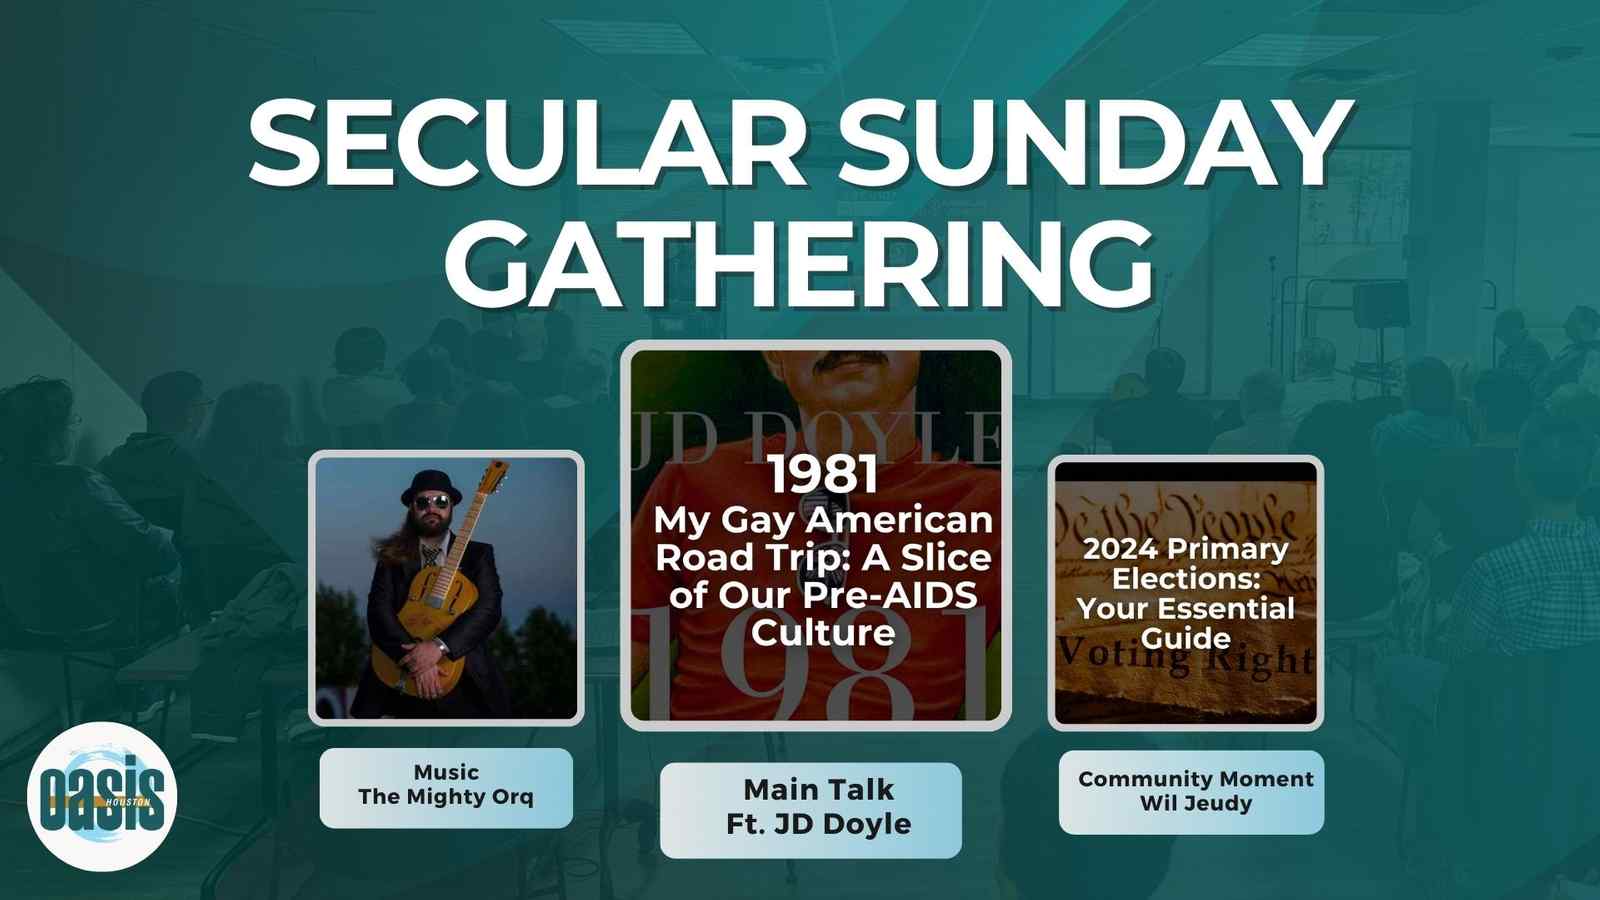 1981 My Gay American Road Trip: A Slice of Our Pre-AIDS Culture | JD Doyle | Music: The Mighty Orq | Weekly Sunday Gathering February 11 2024